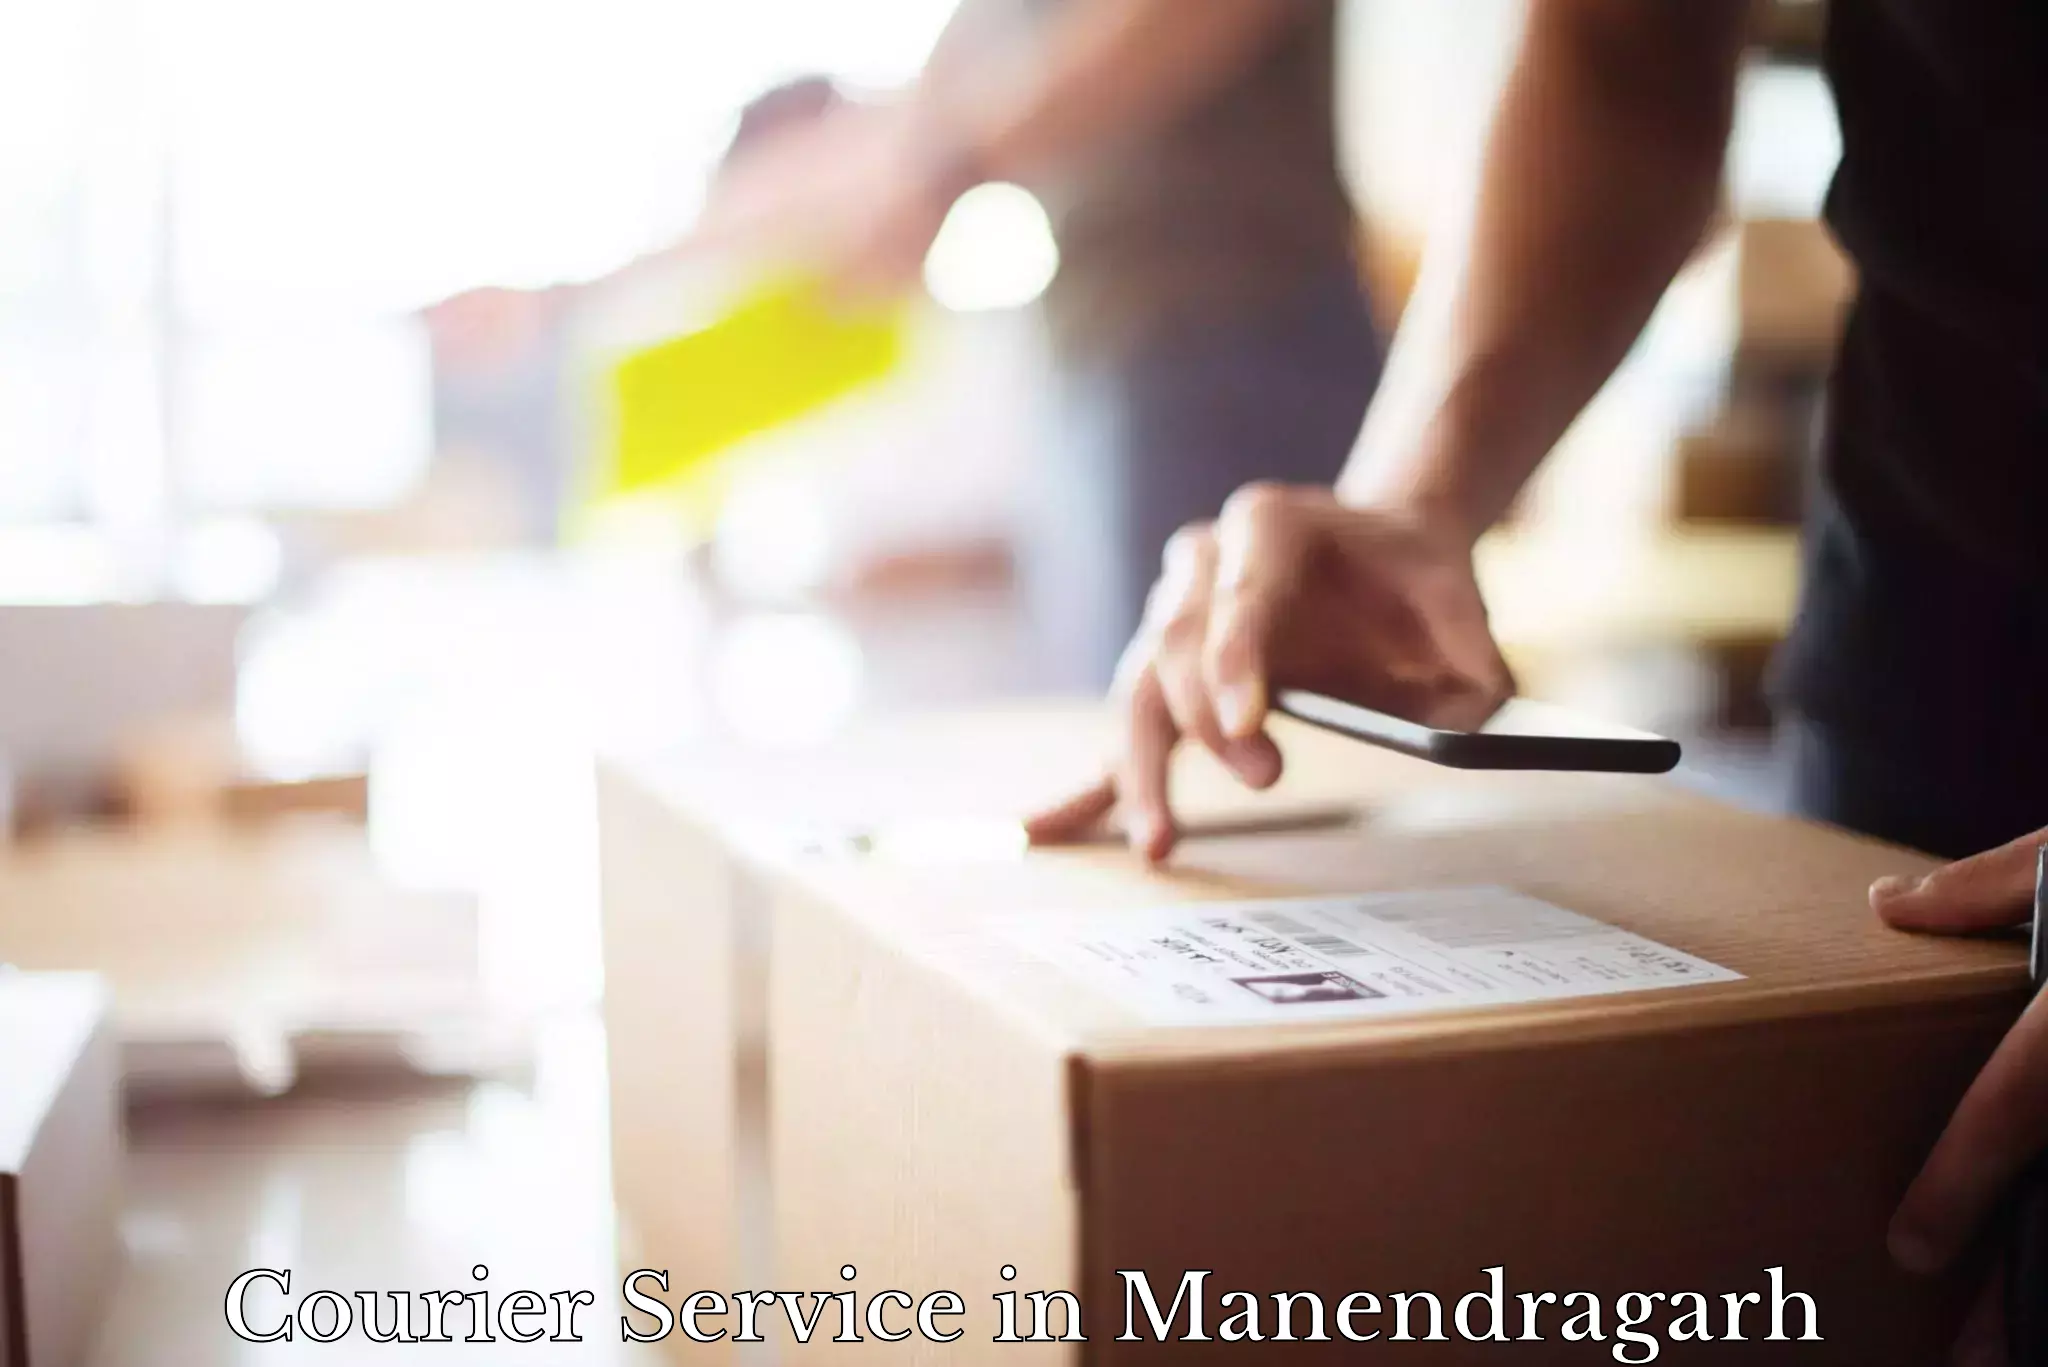 Efficient shipping operations in Manendragarh